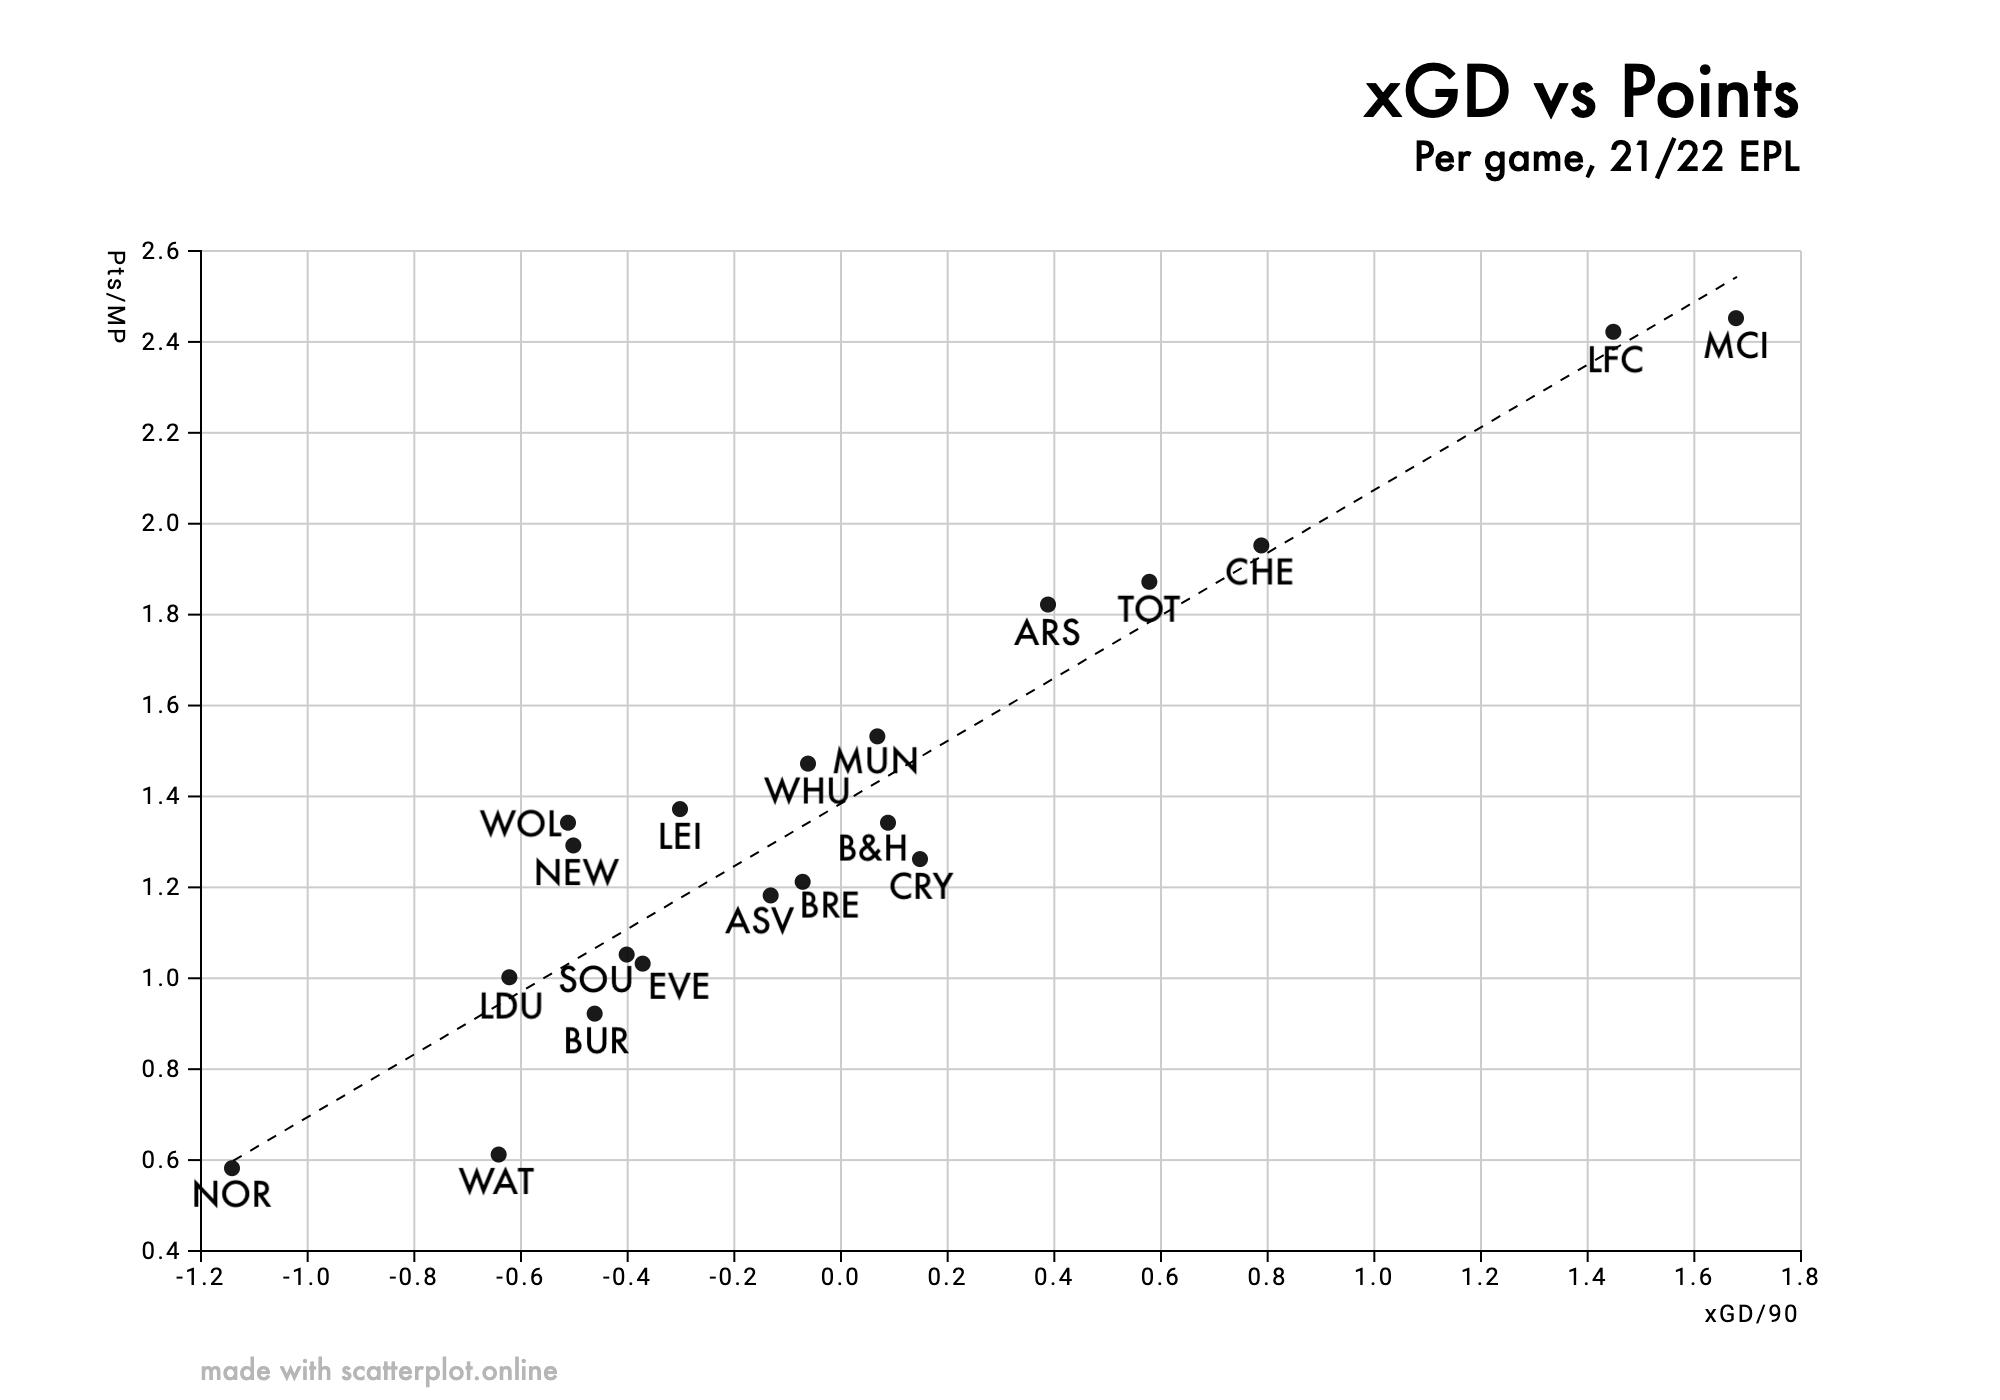 xGD_vs_Points__EPL_21-22.0.png